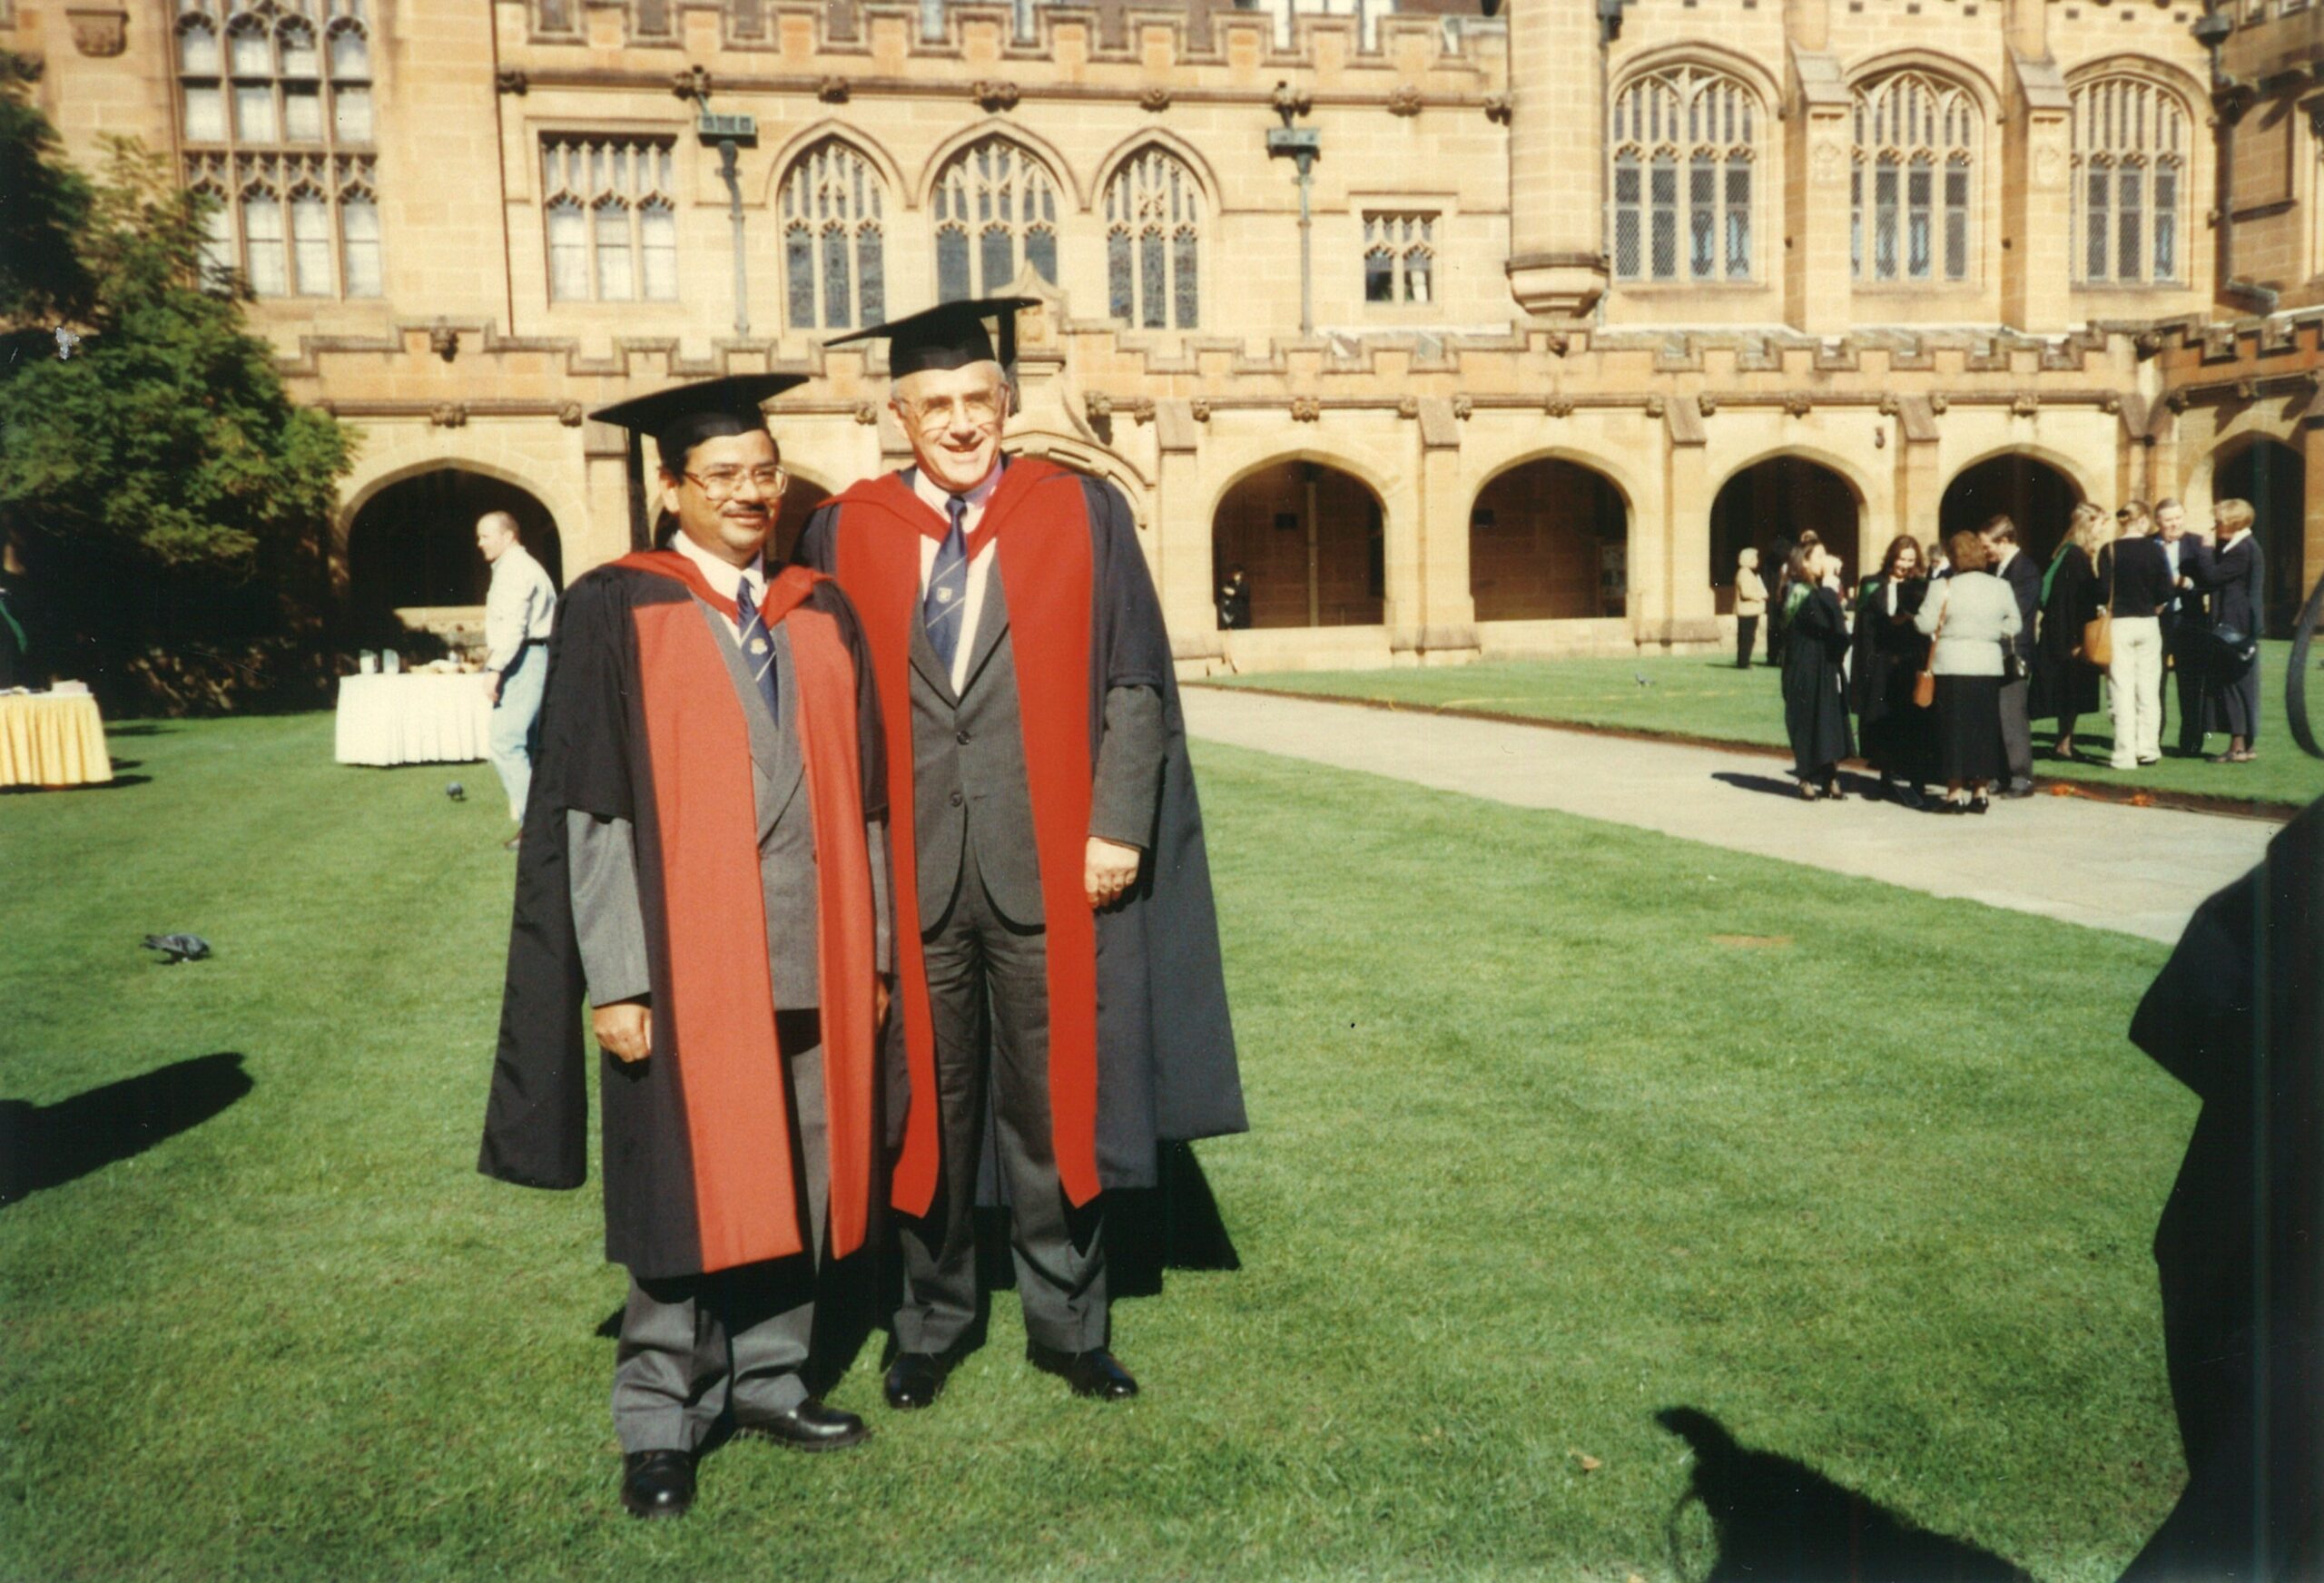 Kedar Adhikari accompanied by the Dean of Faculty of Agriculture during his graduation with the Doctor of Philosophy (PhD) from the University of Sydney.